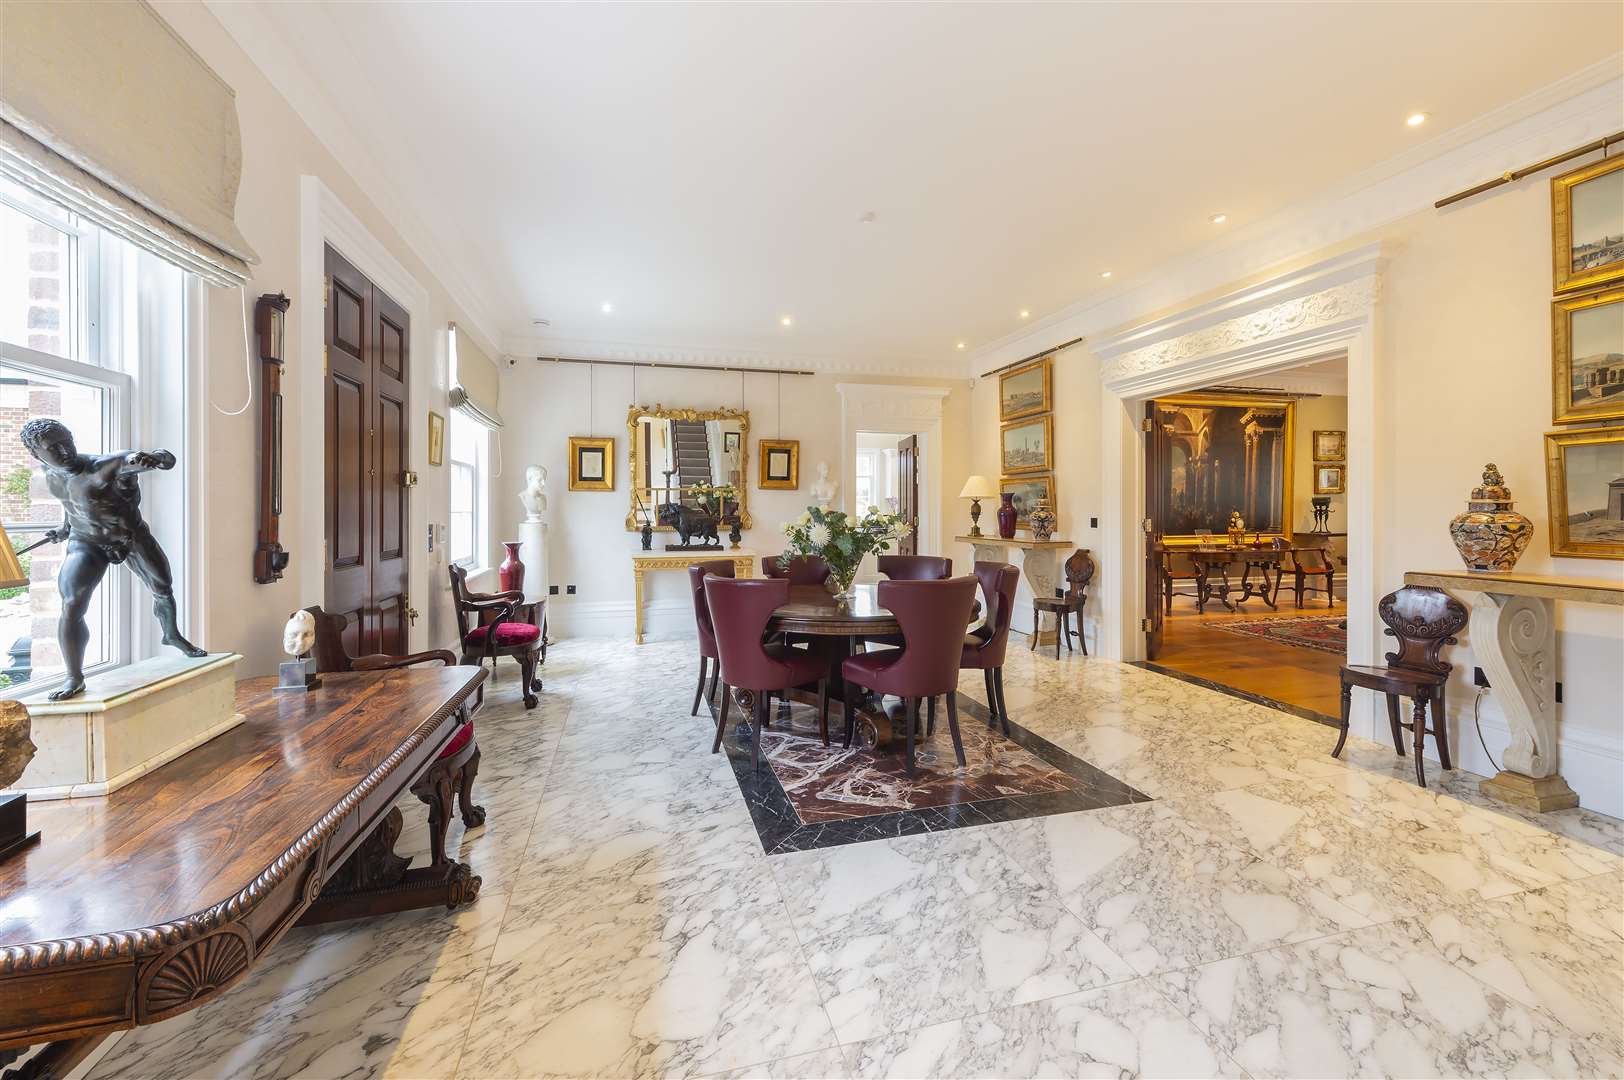 Marble flooring and entertaining space aplenty comes with a £5.5m property